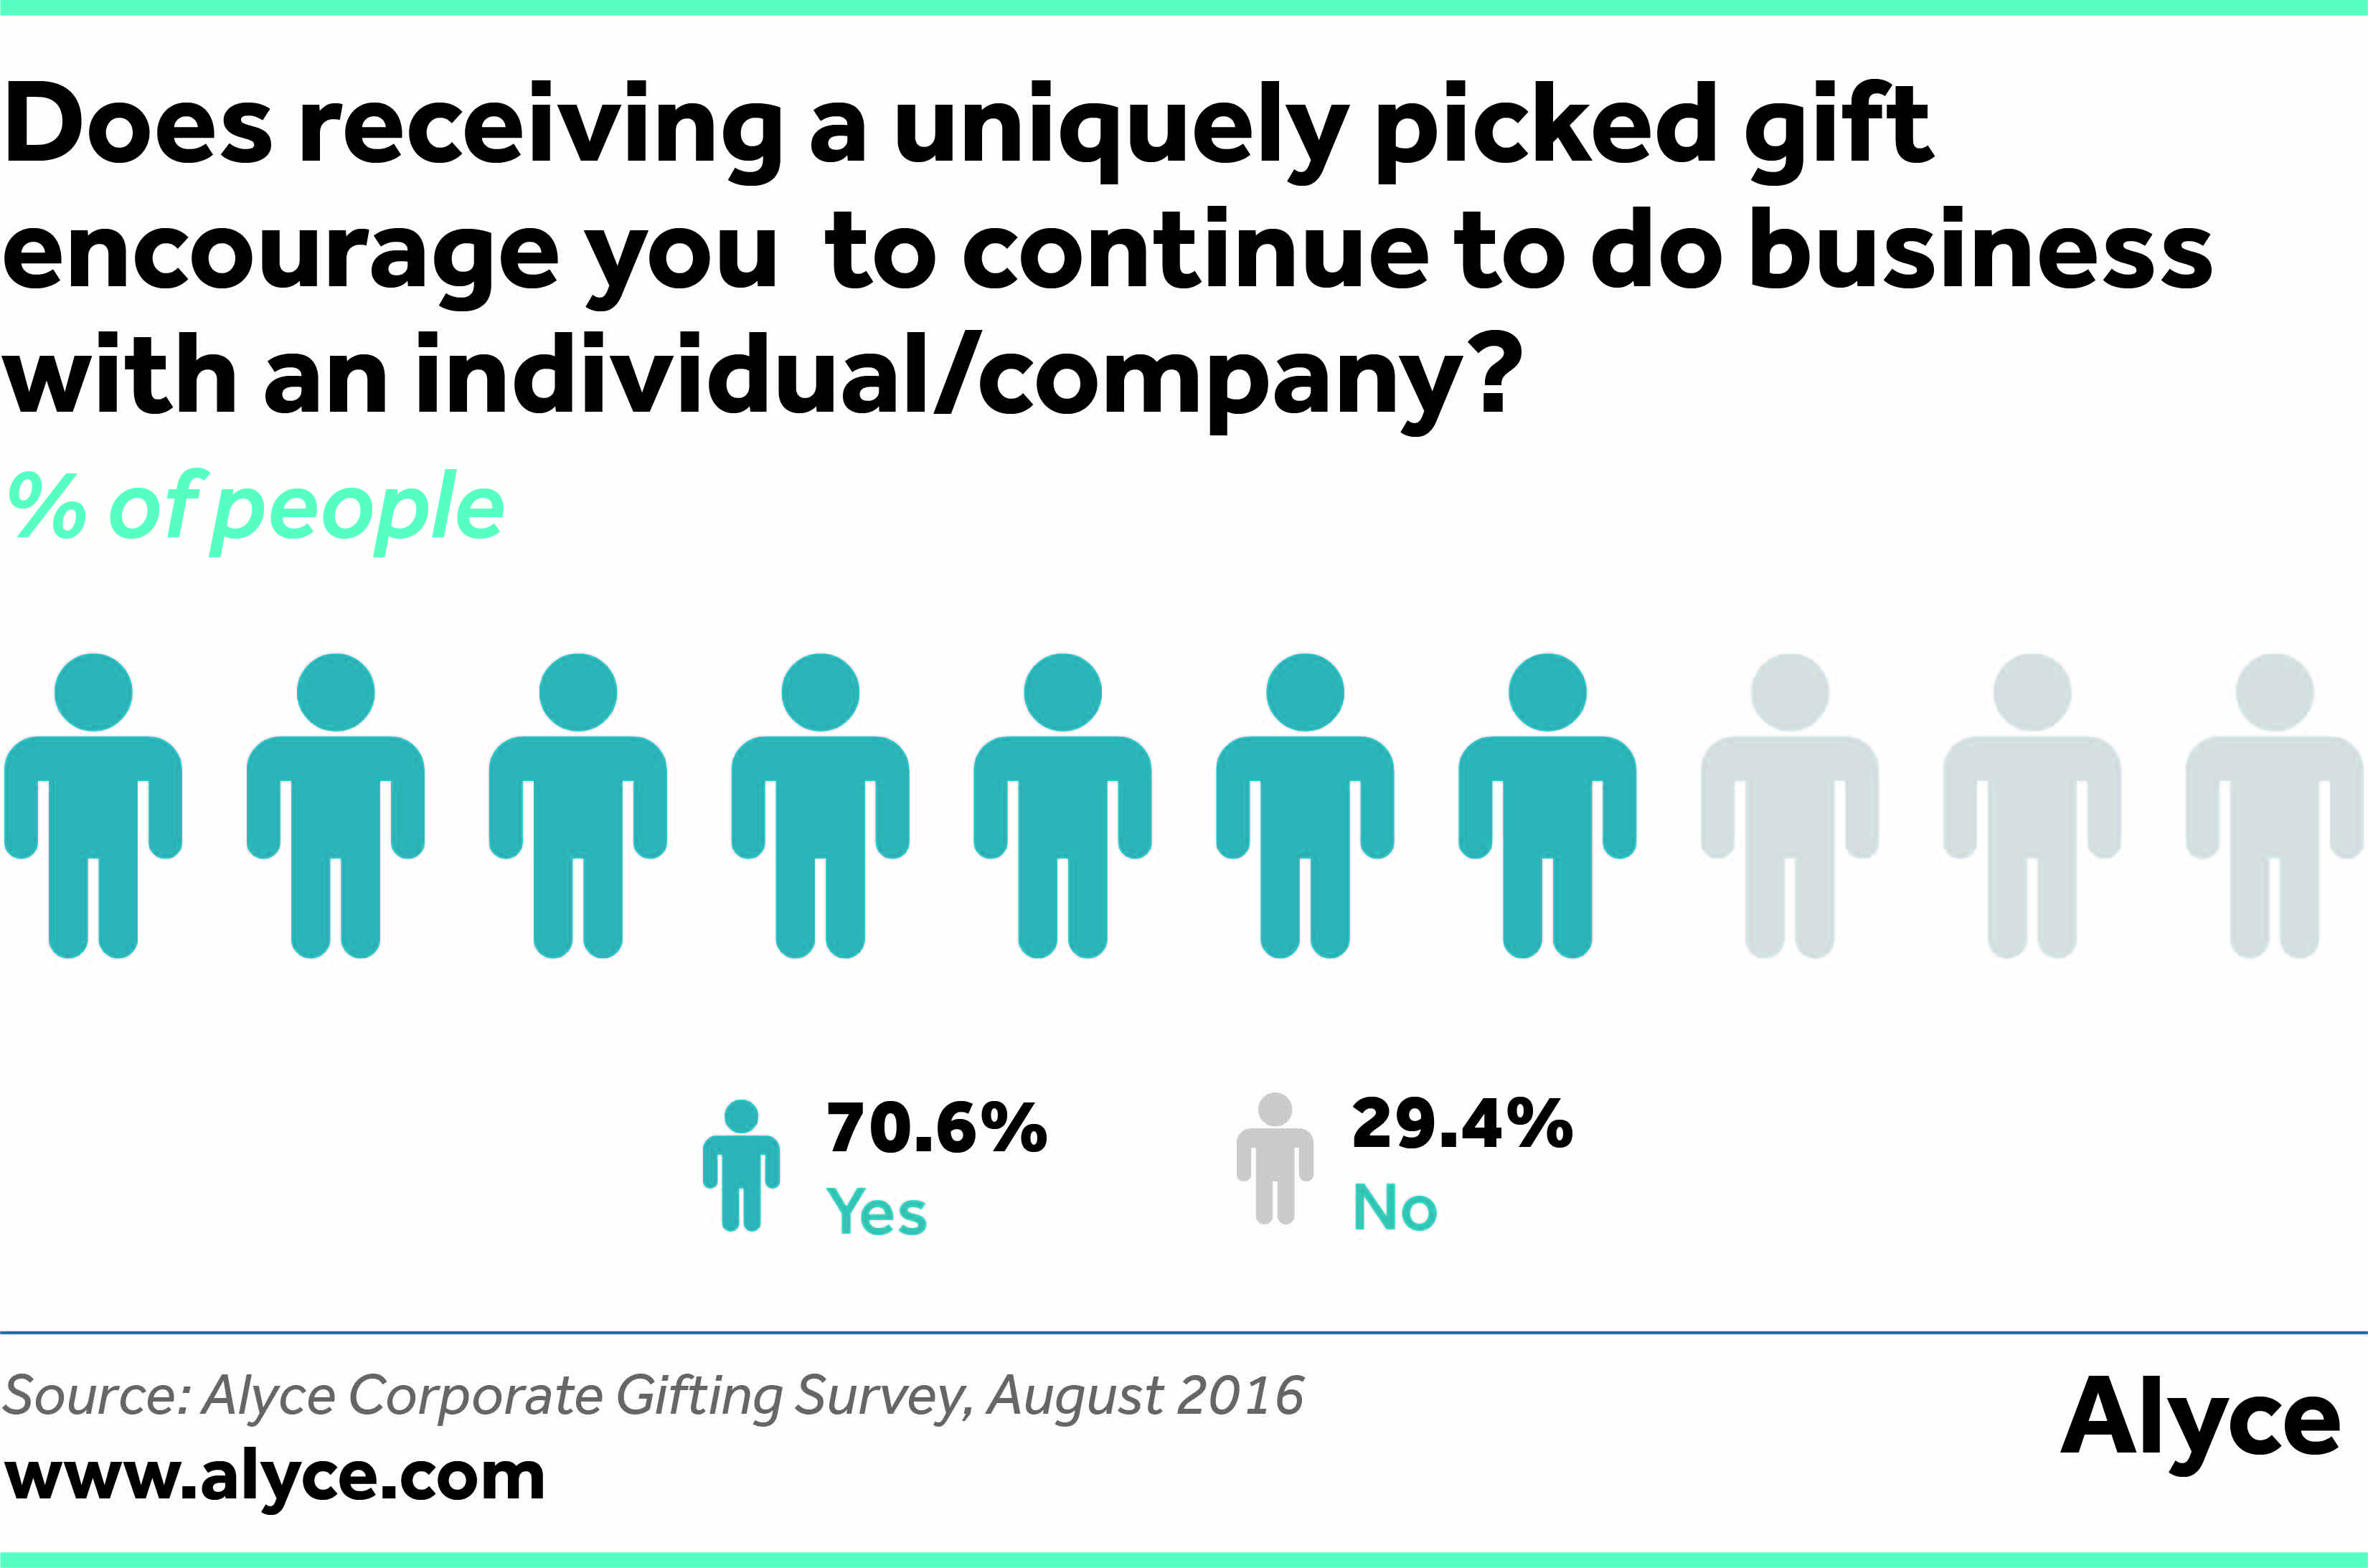 Does receiving a uniquely picked gift encourage you to continue to do business with an individua/company?